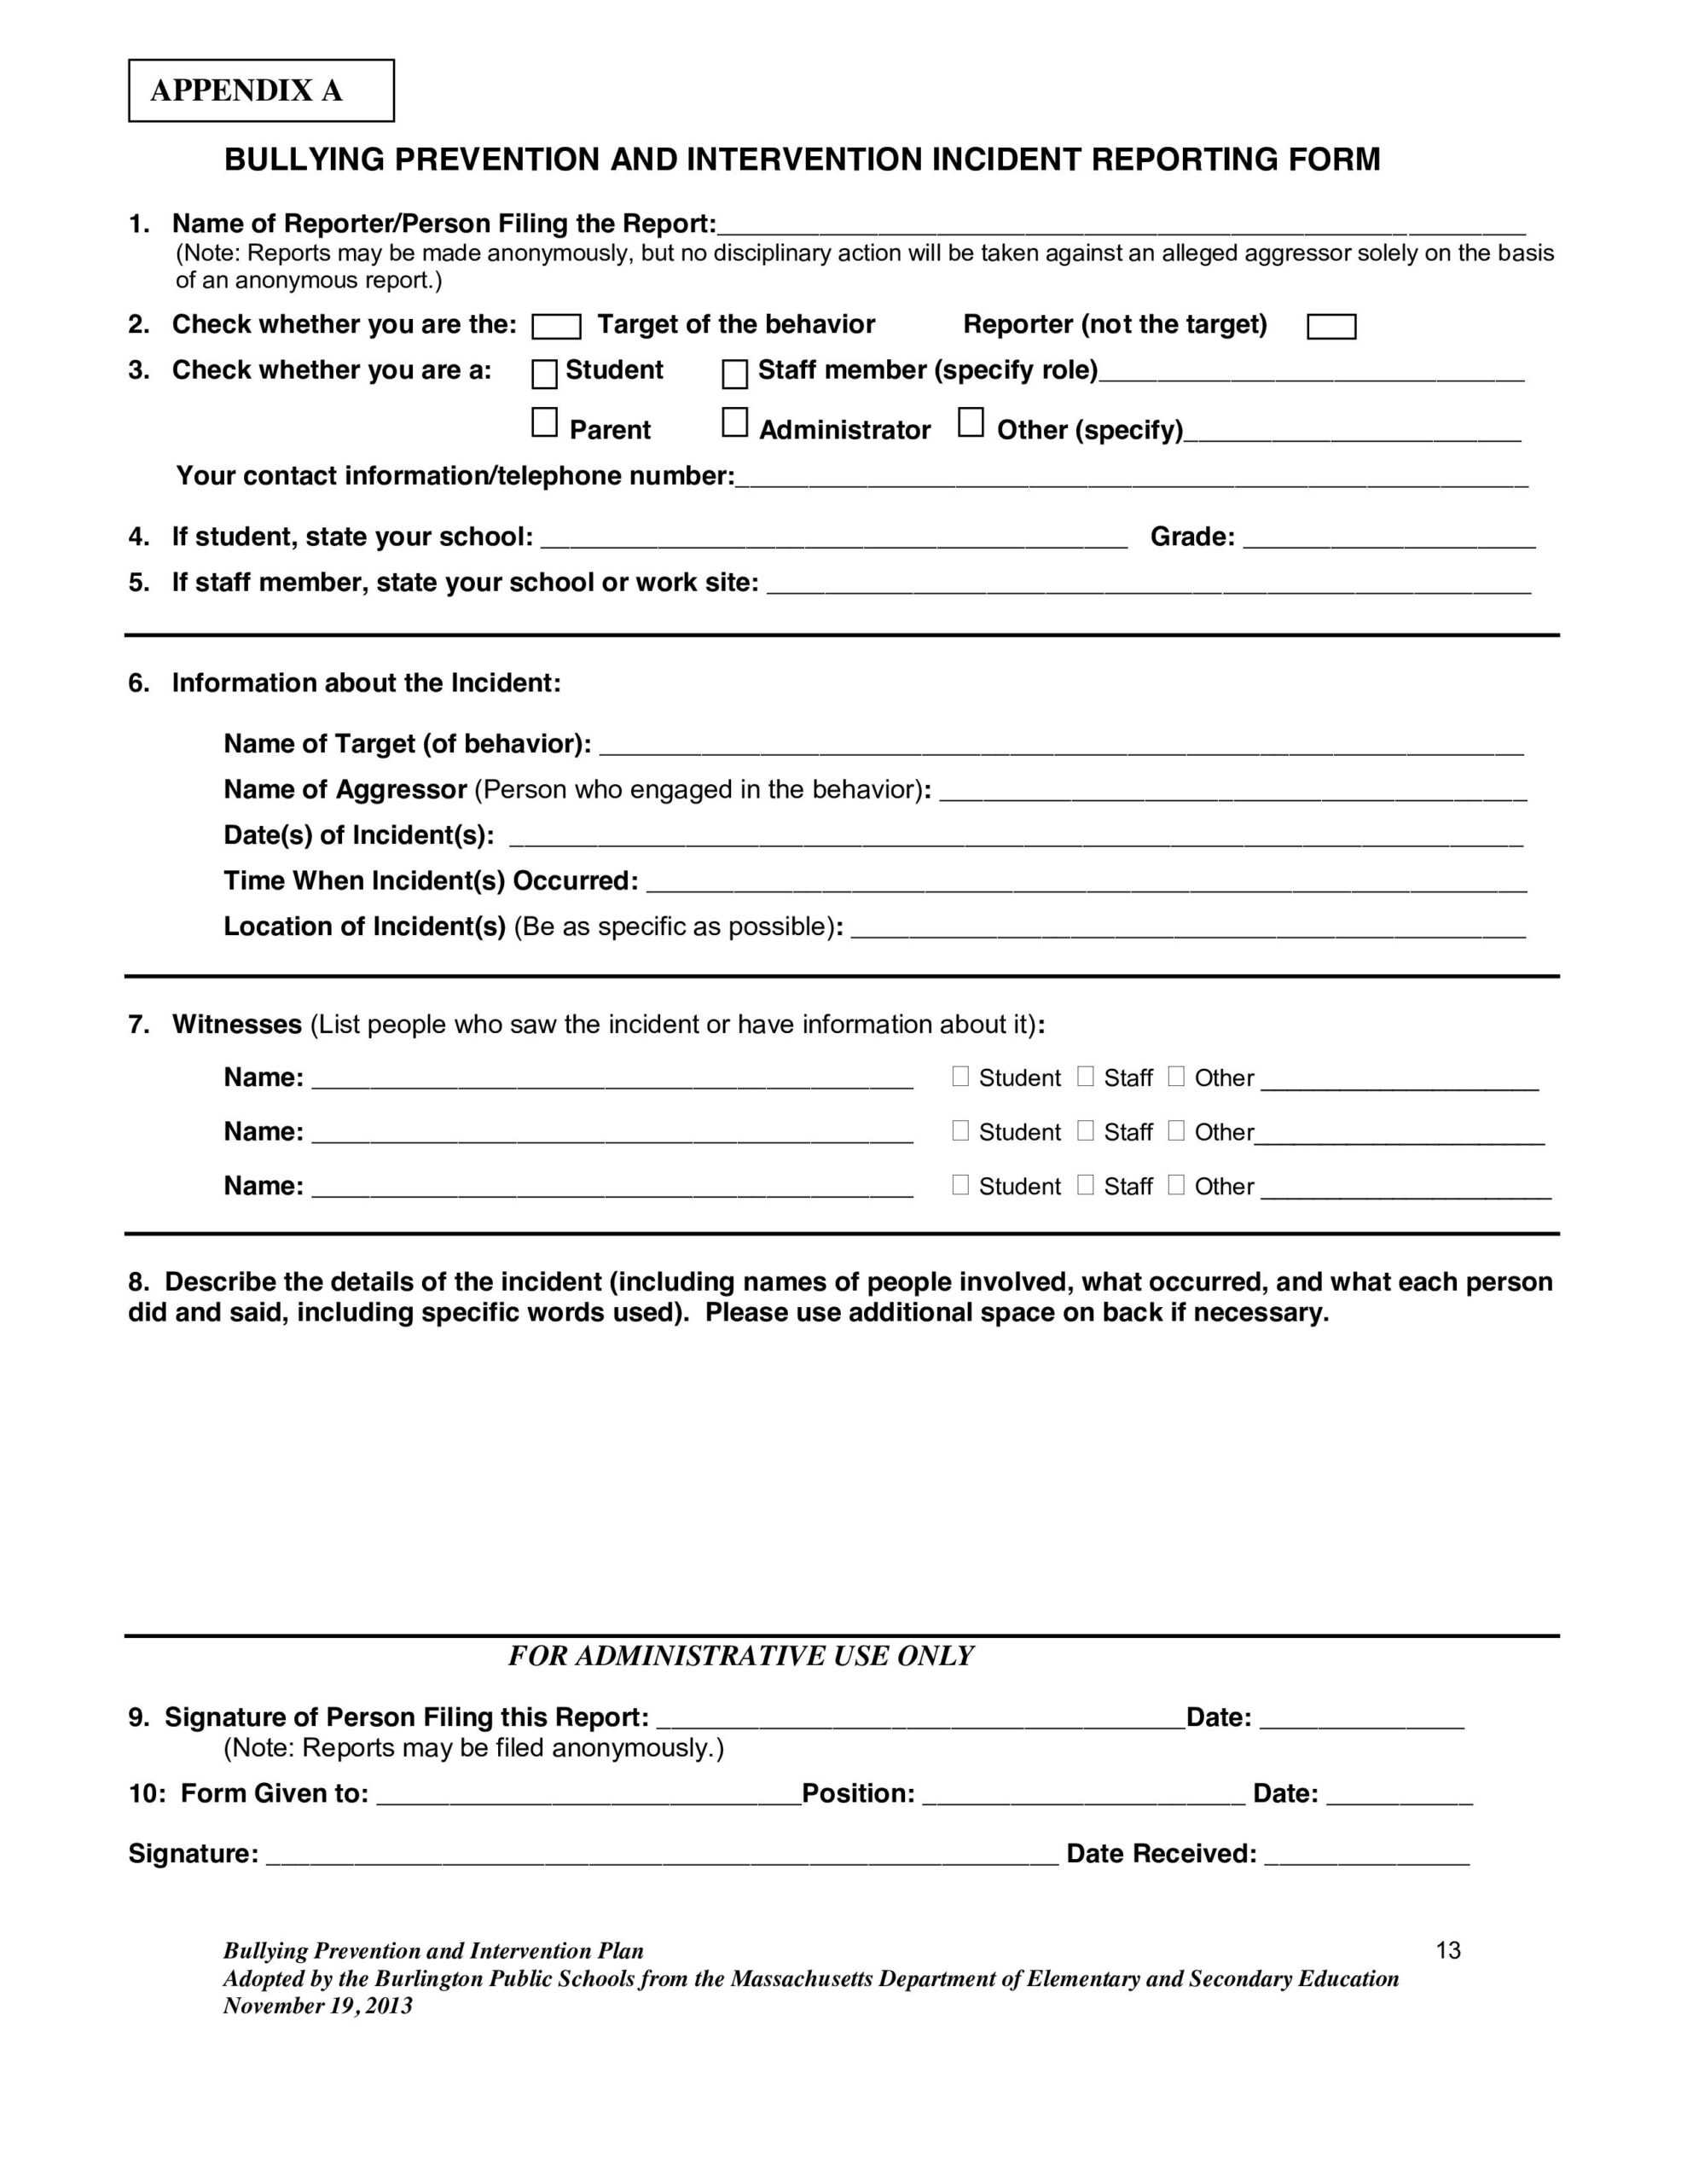 Bps Bullying Incident Report Form | Marshall Simonds Middle With School Incident Report Template